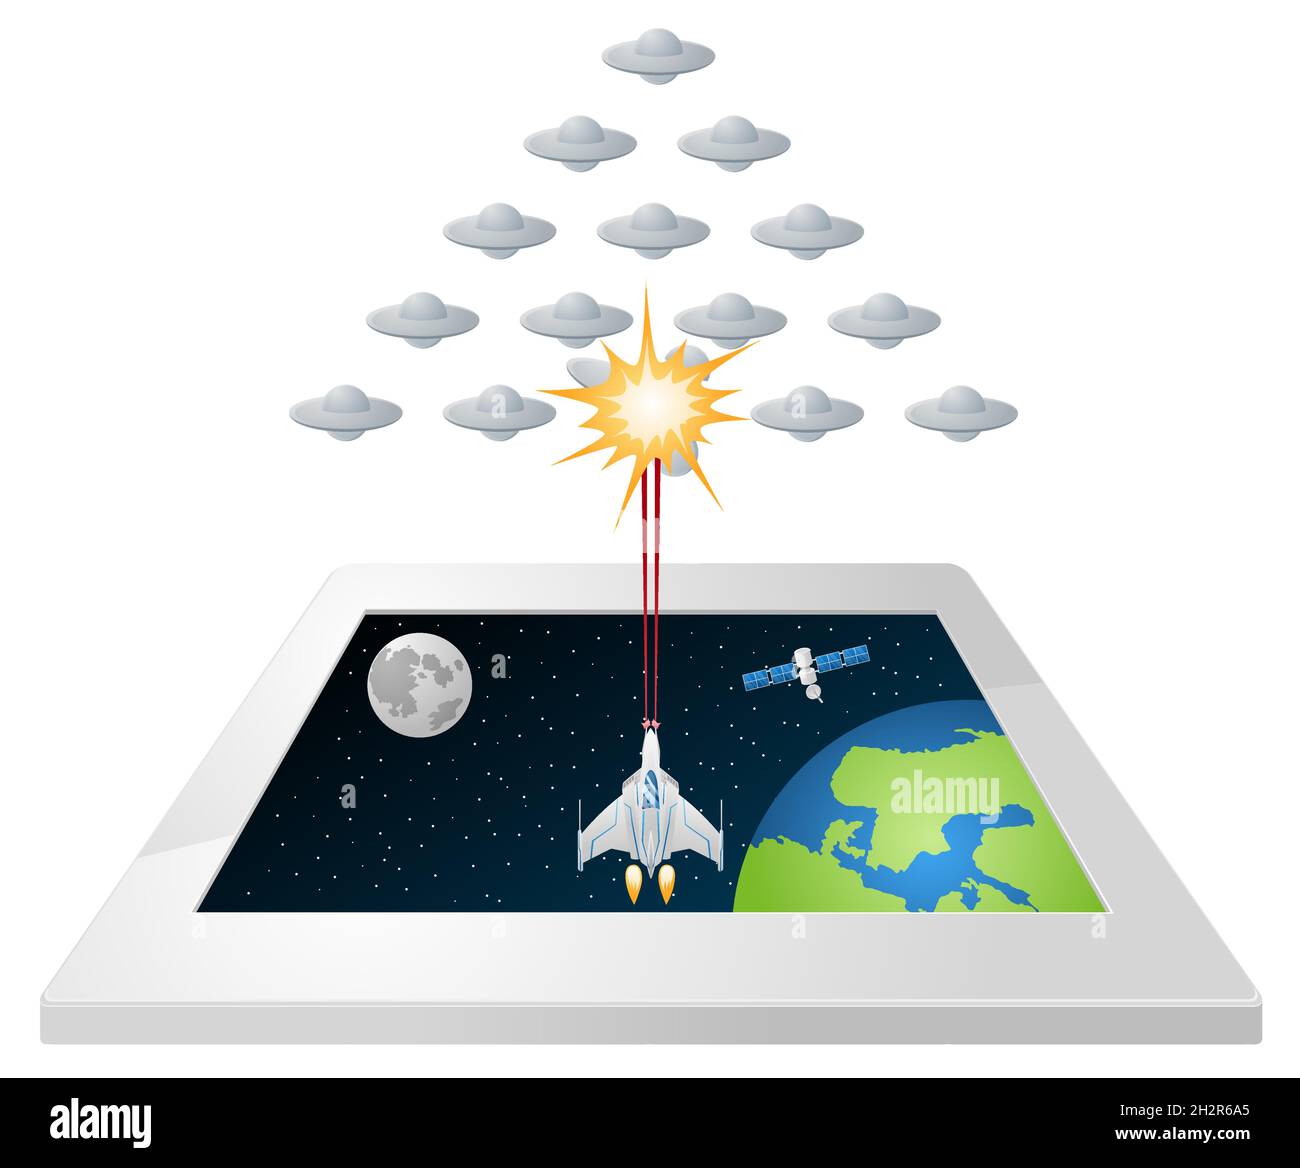 Space game on tablet. Vector illustration. Stock Vector